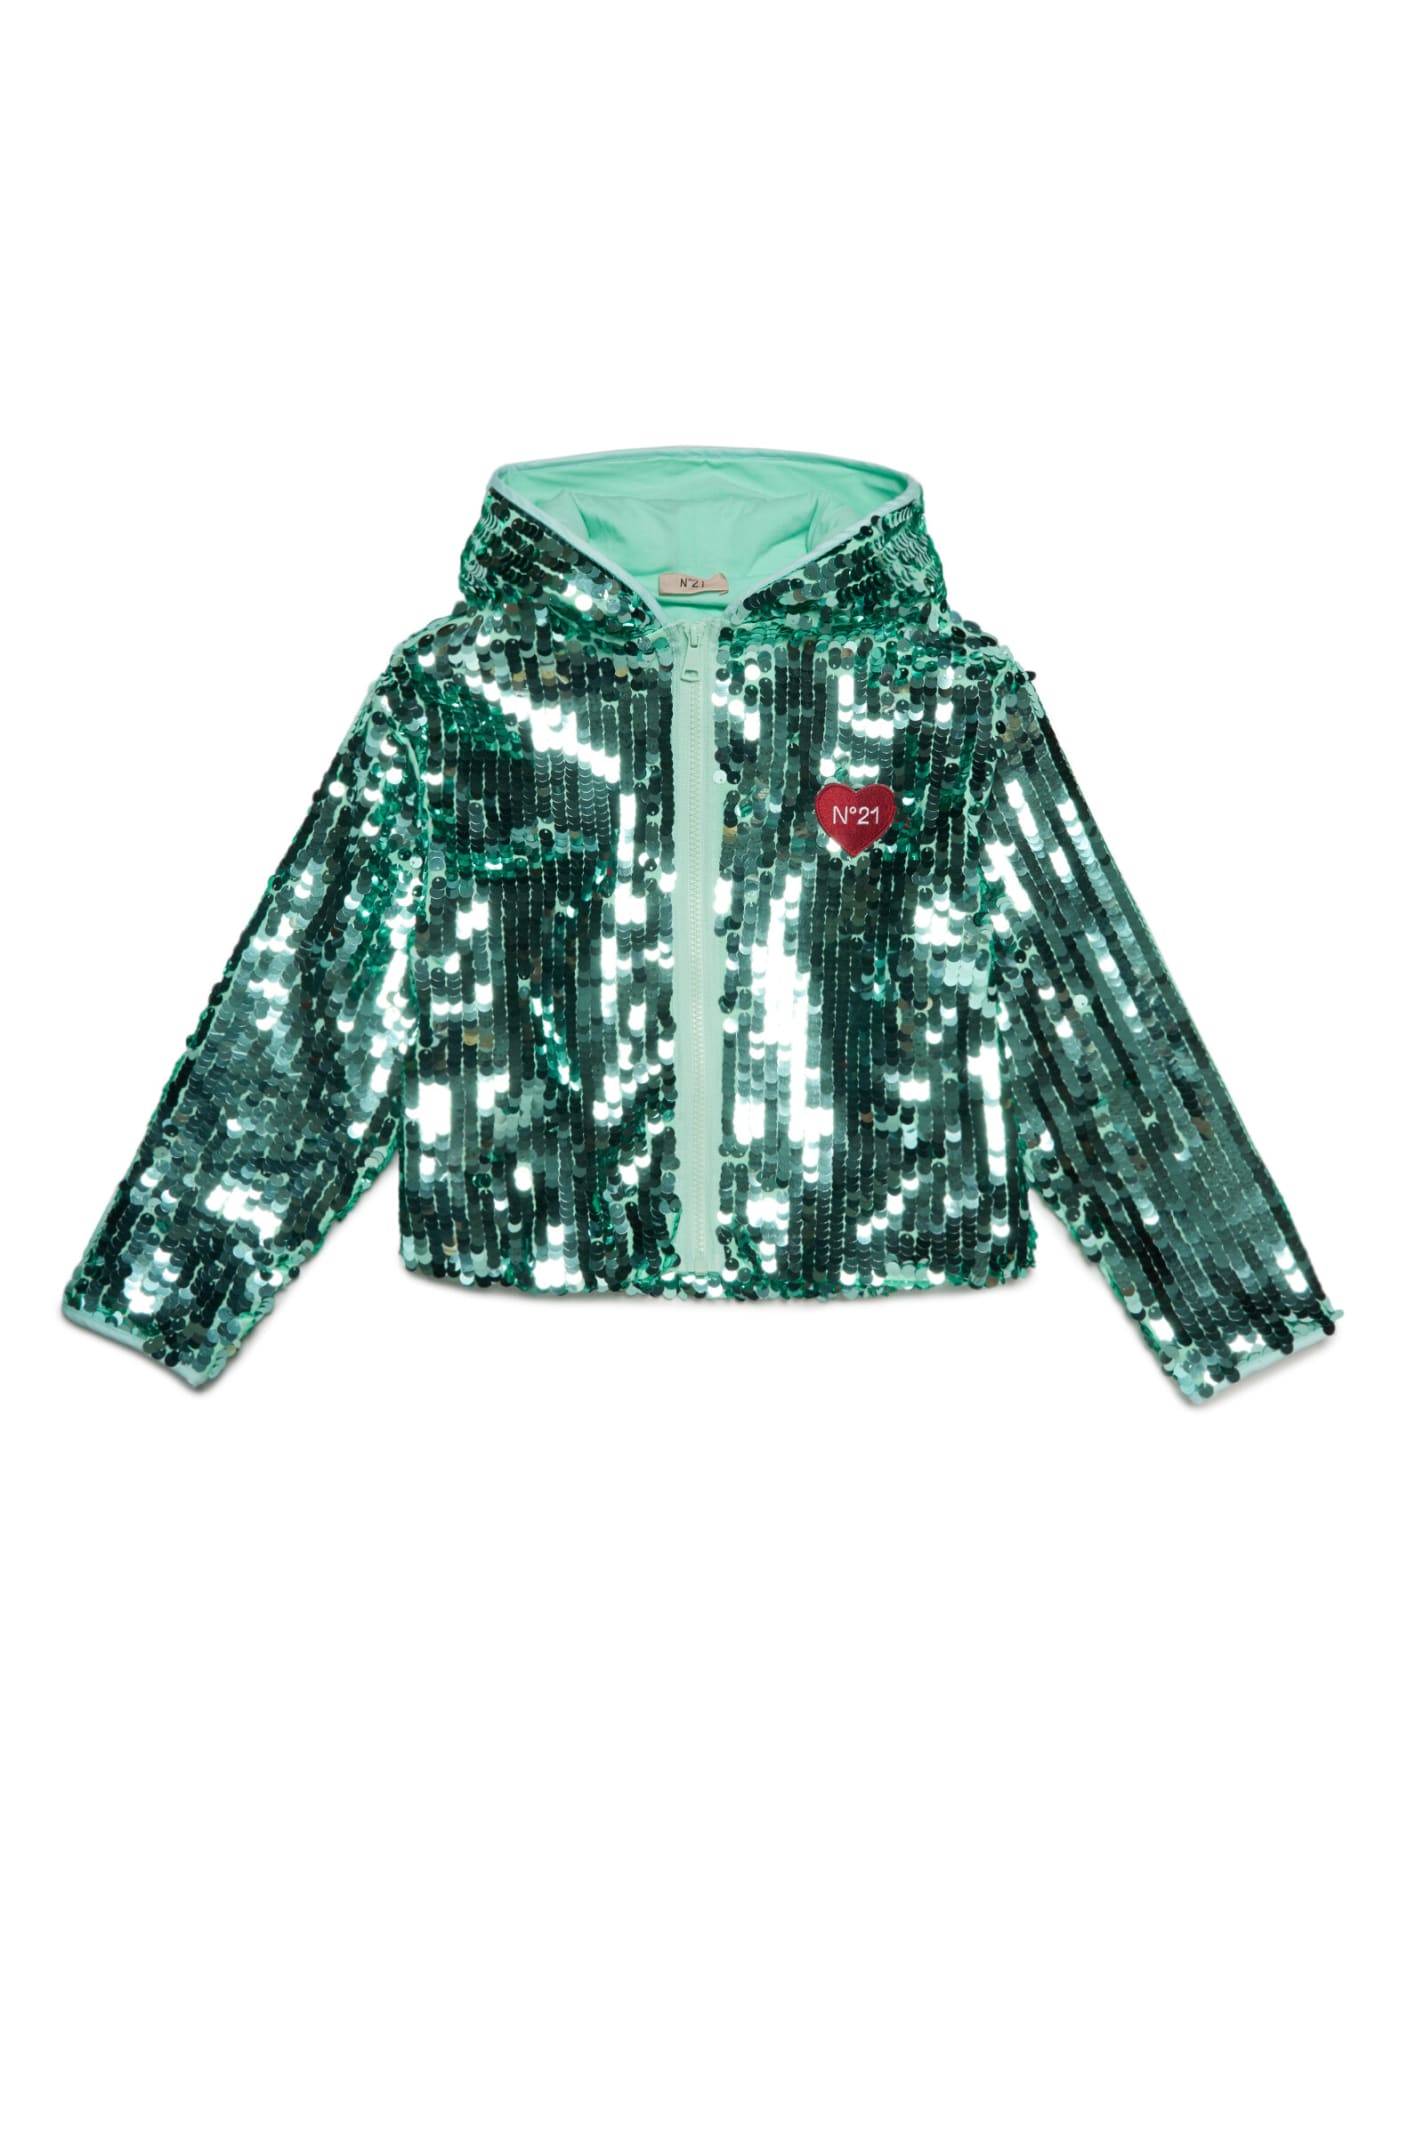 N°21 N21J73F JACKET N°21 MINT GREEN SEQUIN JACKET WITH HOOD AND FRONT ZIP